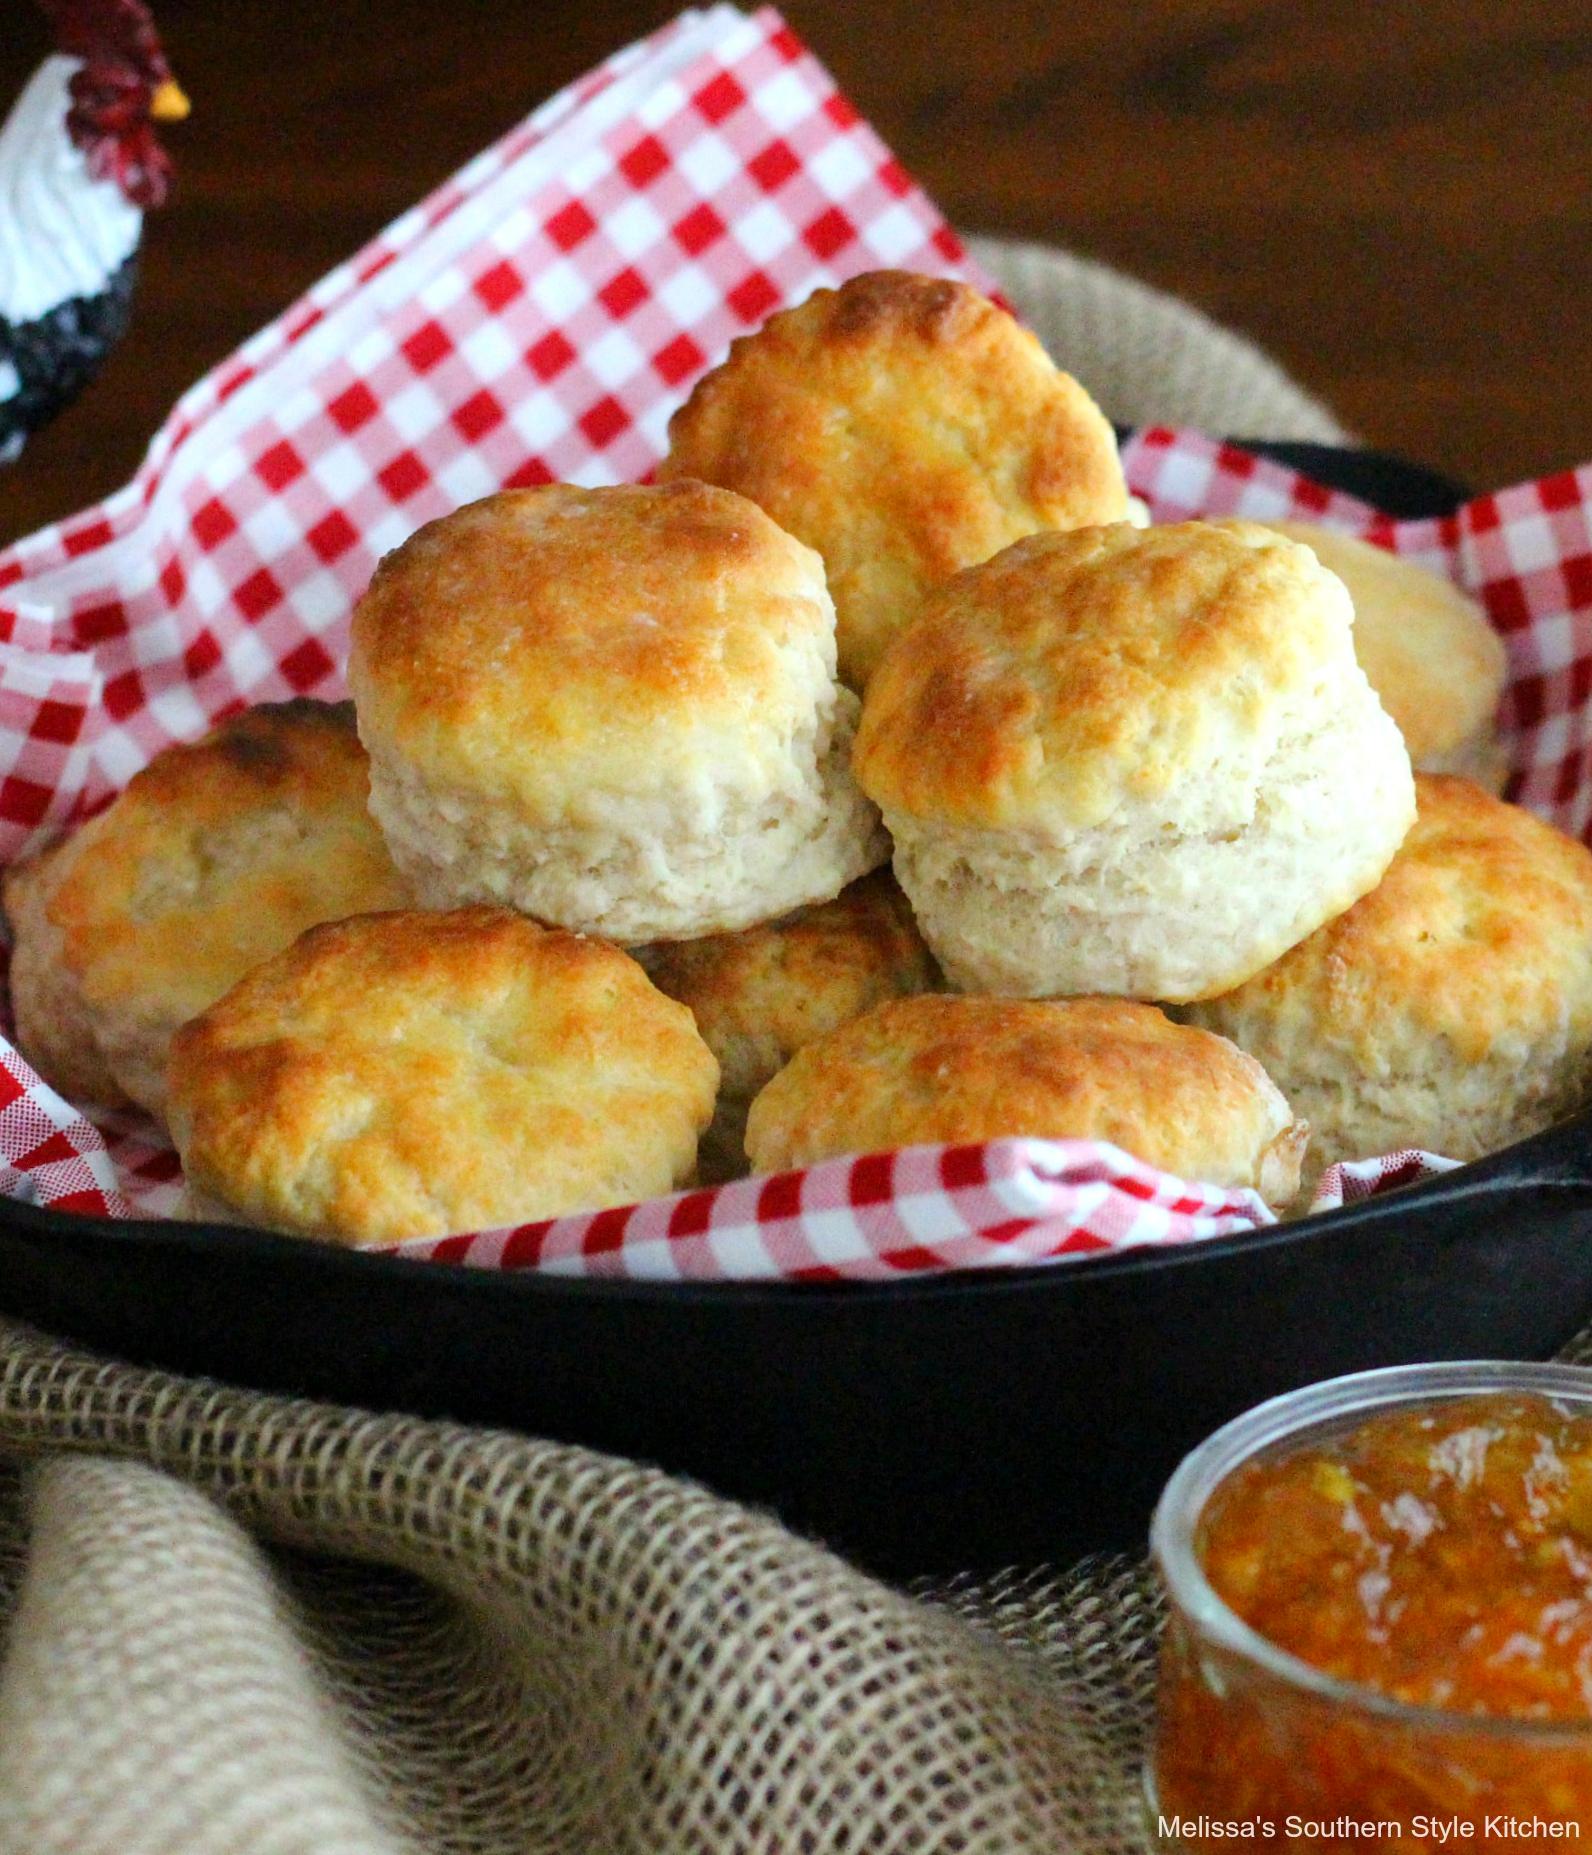  You can't go wrong with a classic southern biscuit recipe like this one